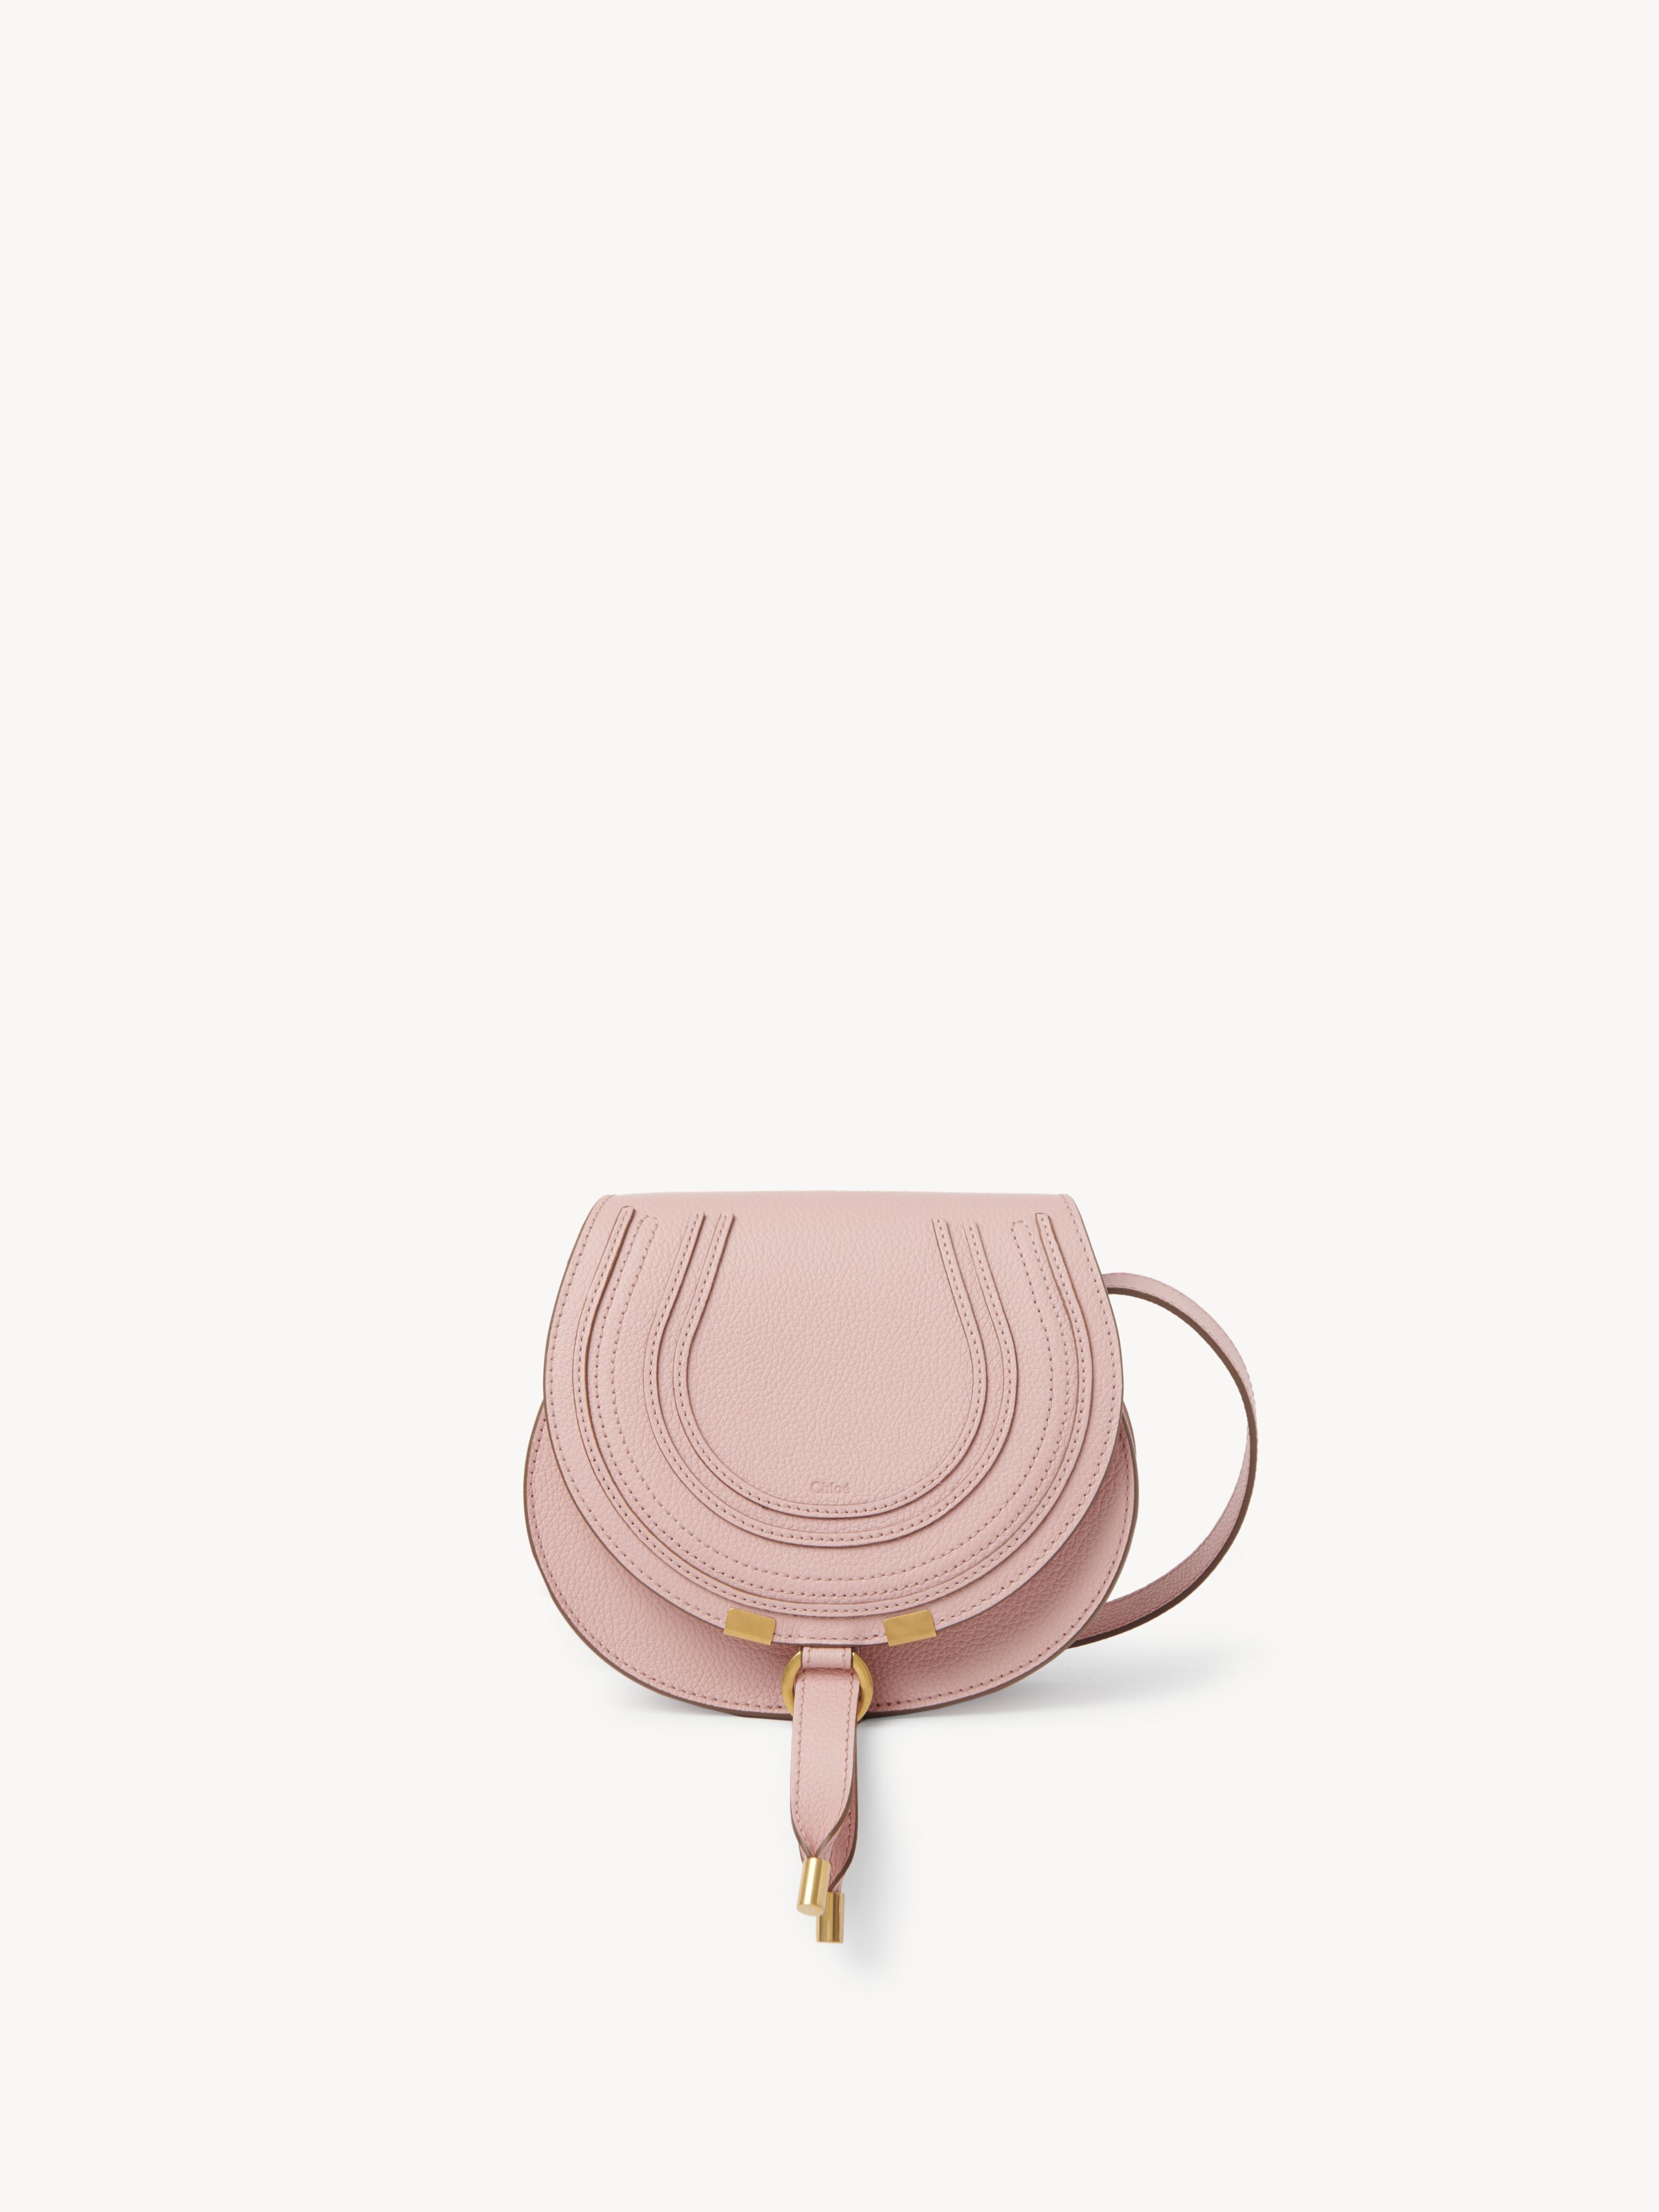 CHLOÉ MARCIE SMALL SADDLE BAG PINK SIZE ONESIZE 100% CALF-SKIN LEATHER